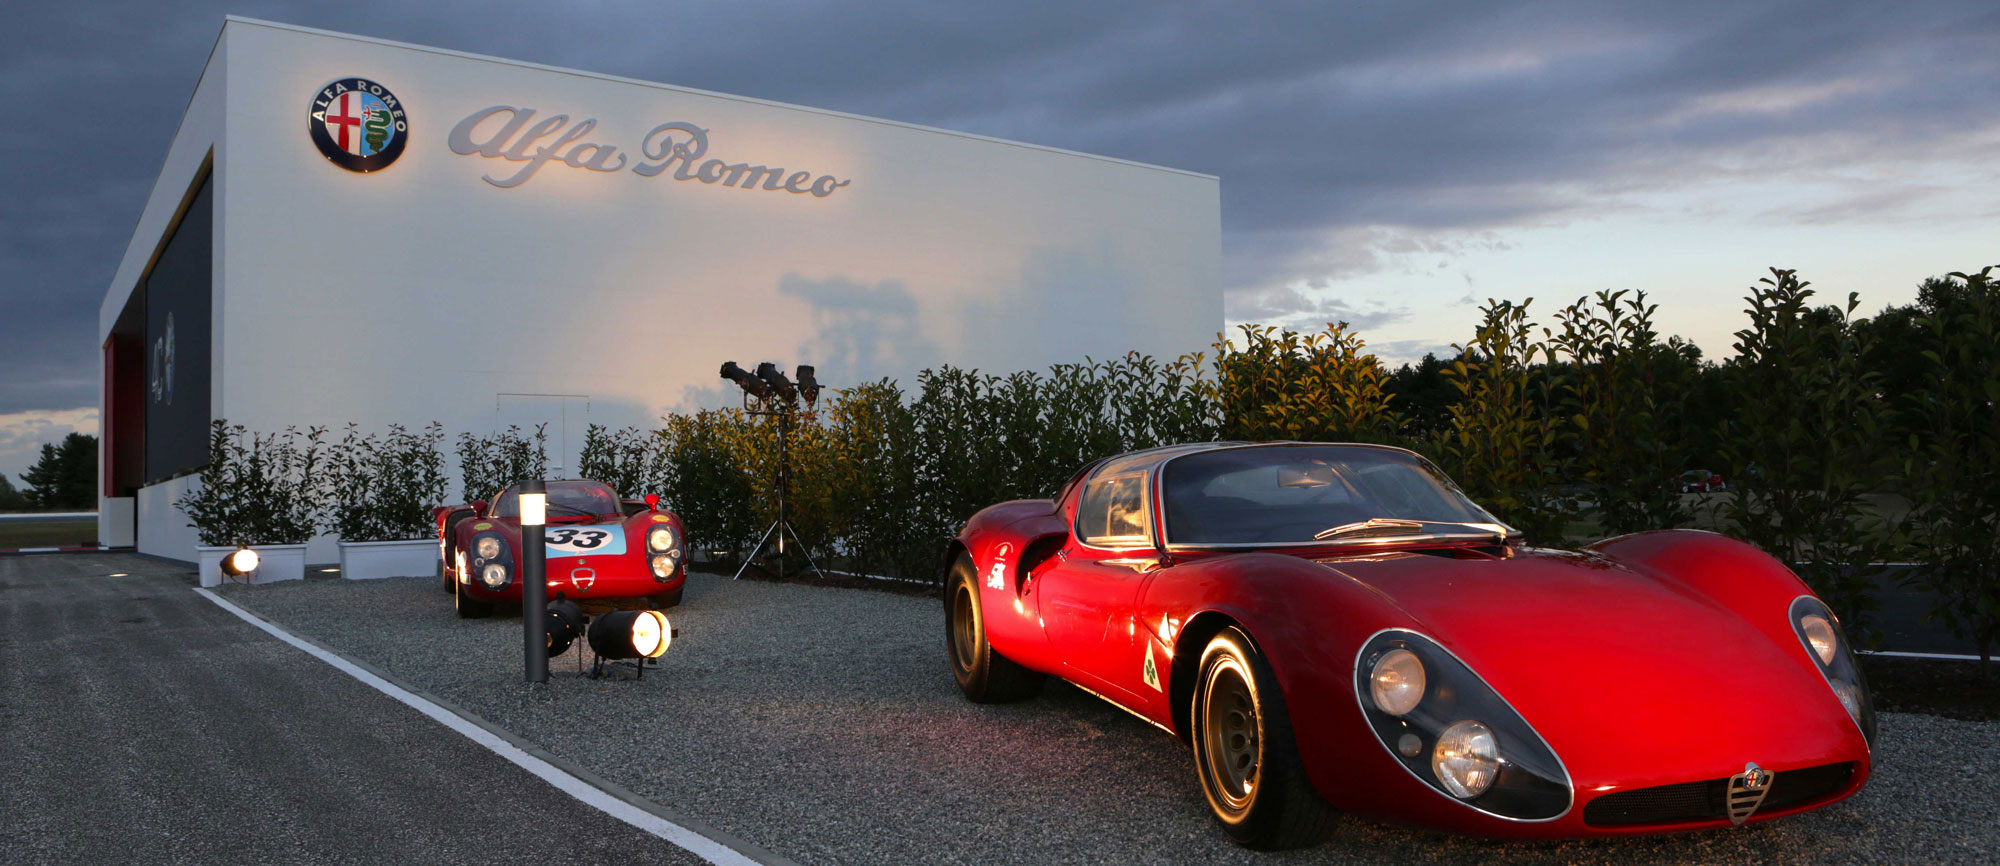 Photos of vintage Alfa Romeo cars parked in front of the Grandstand